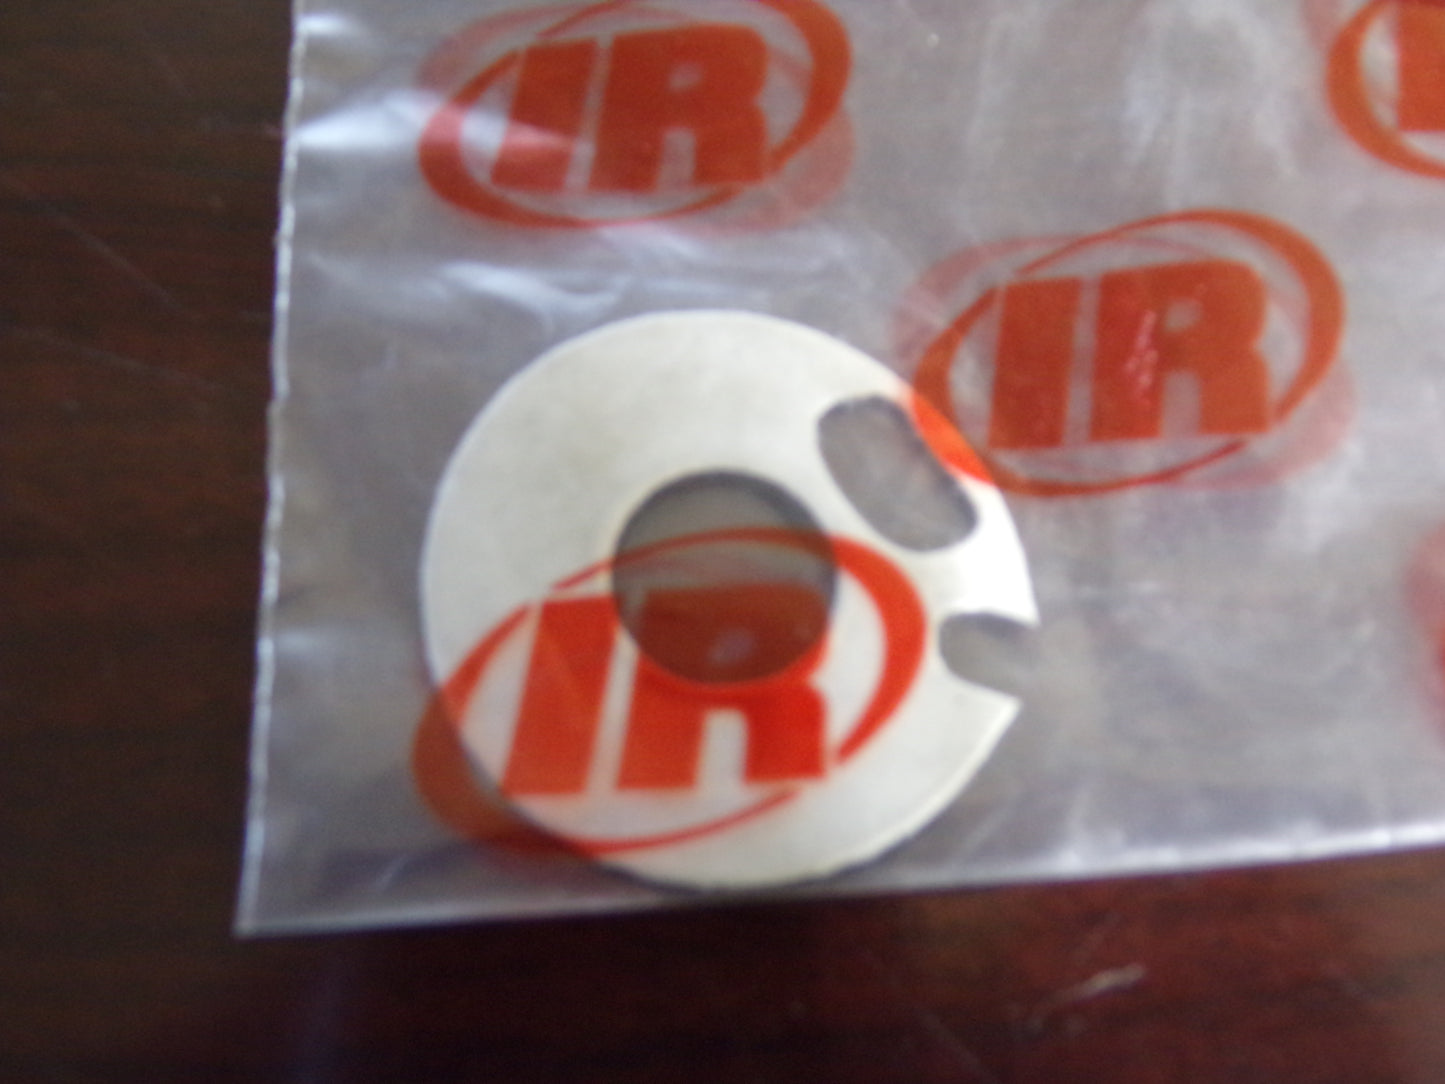 Ingersoll Rand End Plate Gasket for 728 Air Drill, Part# 728-739 (CR00559-WTA14)